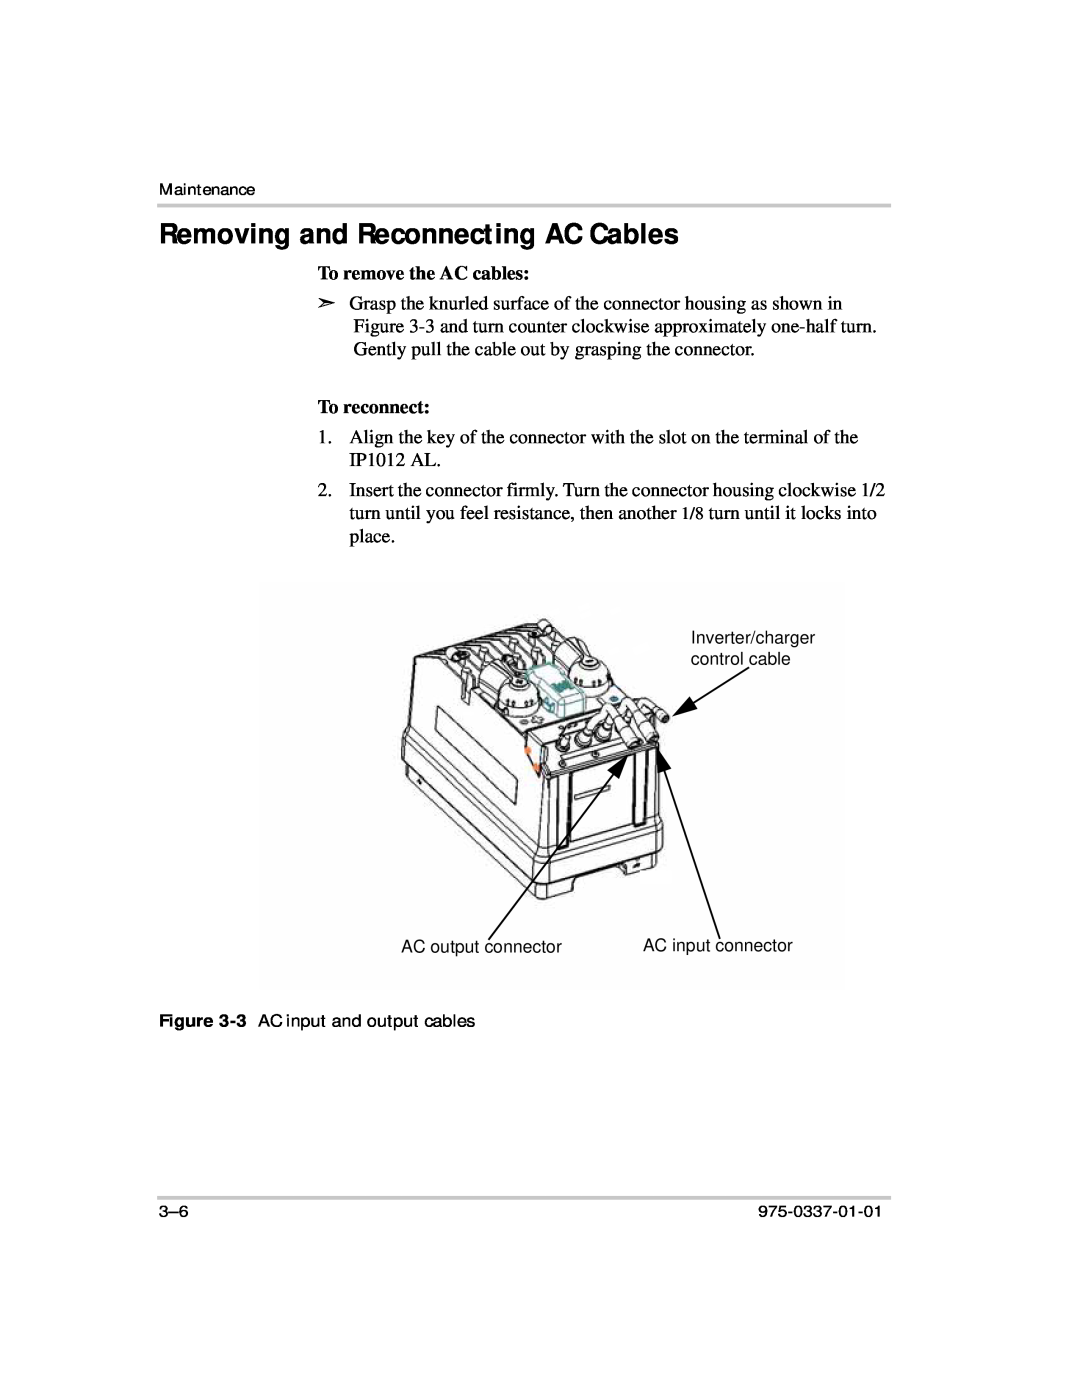 Xantrex Technology IP1012 AL manual Removing and Reconnecting AC Cables, To remove the AC cables, To reconnect 